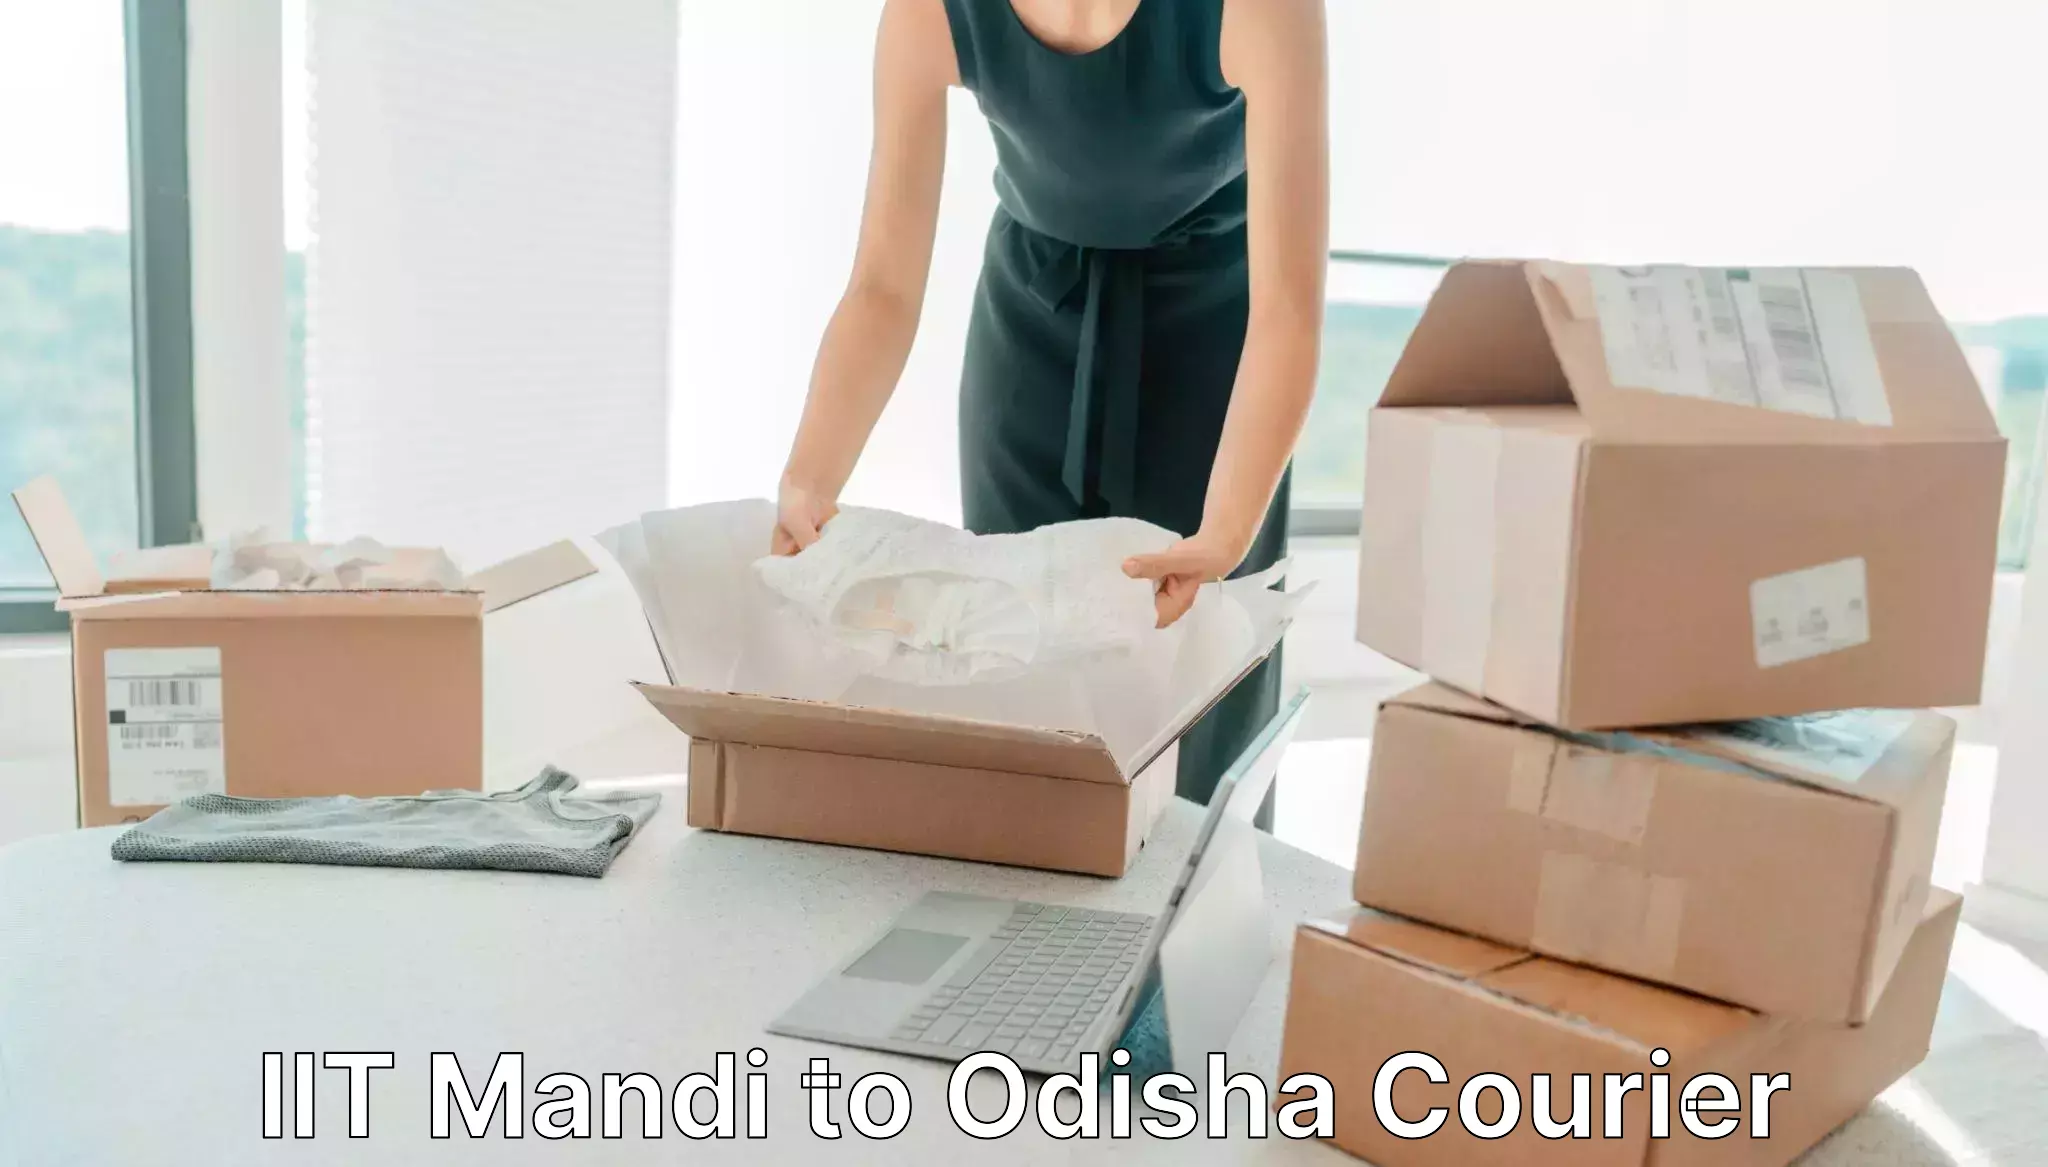 Reliable courier service in IIT Mandi to Swampatna